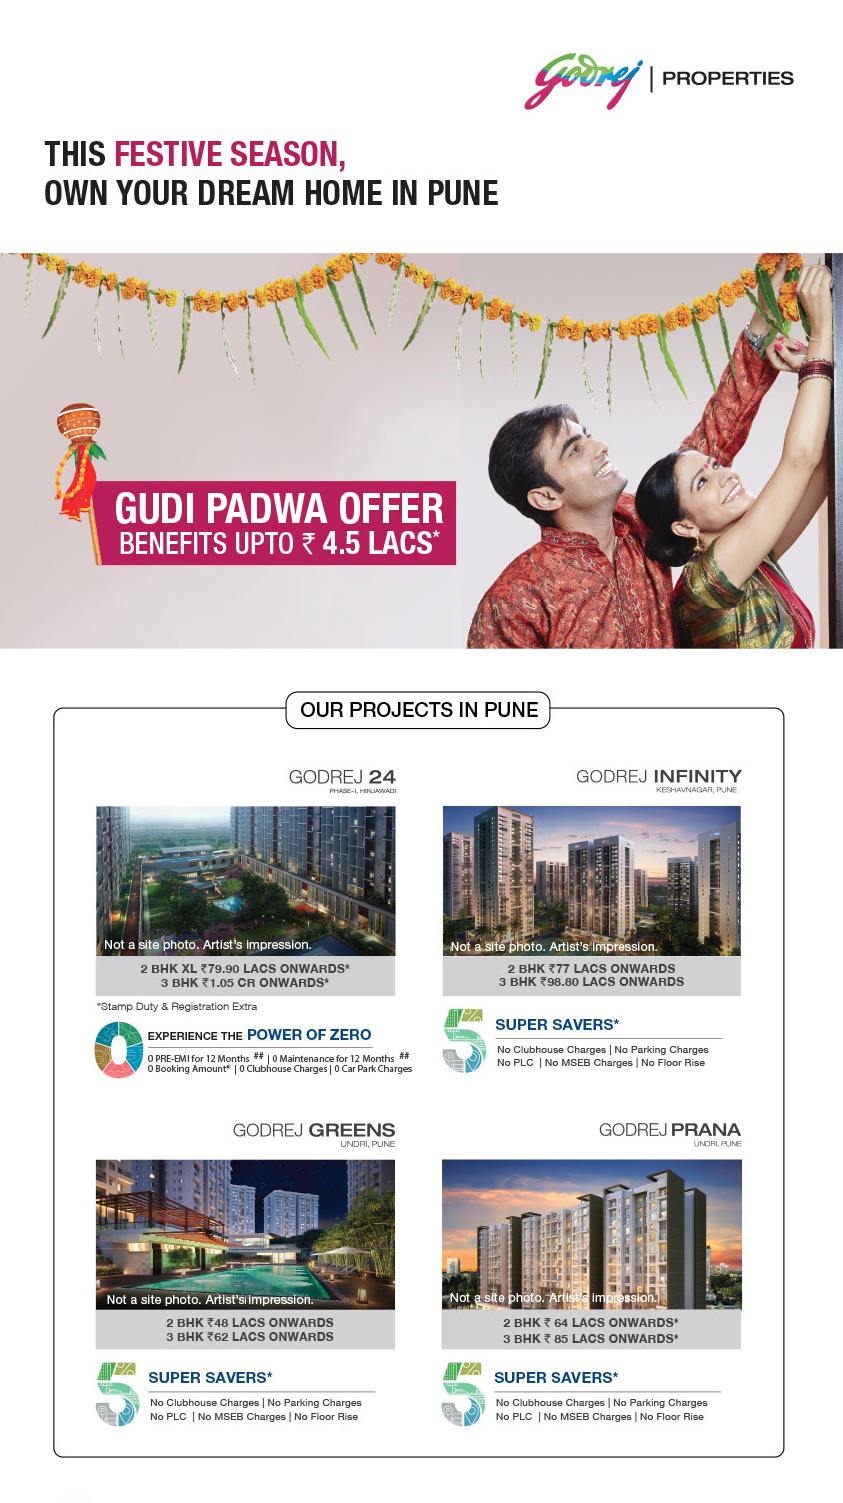 Gudi Padwa Offer with benefits up to Rs. 4.5 lacs at Godrej properties in Pune